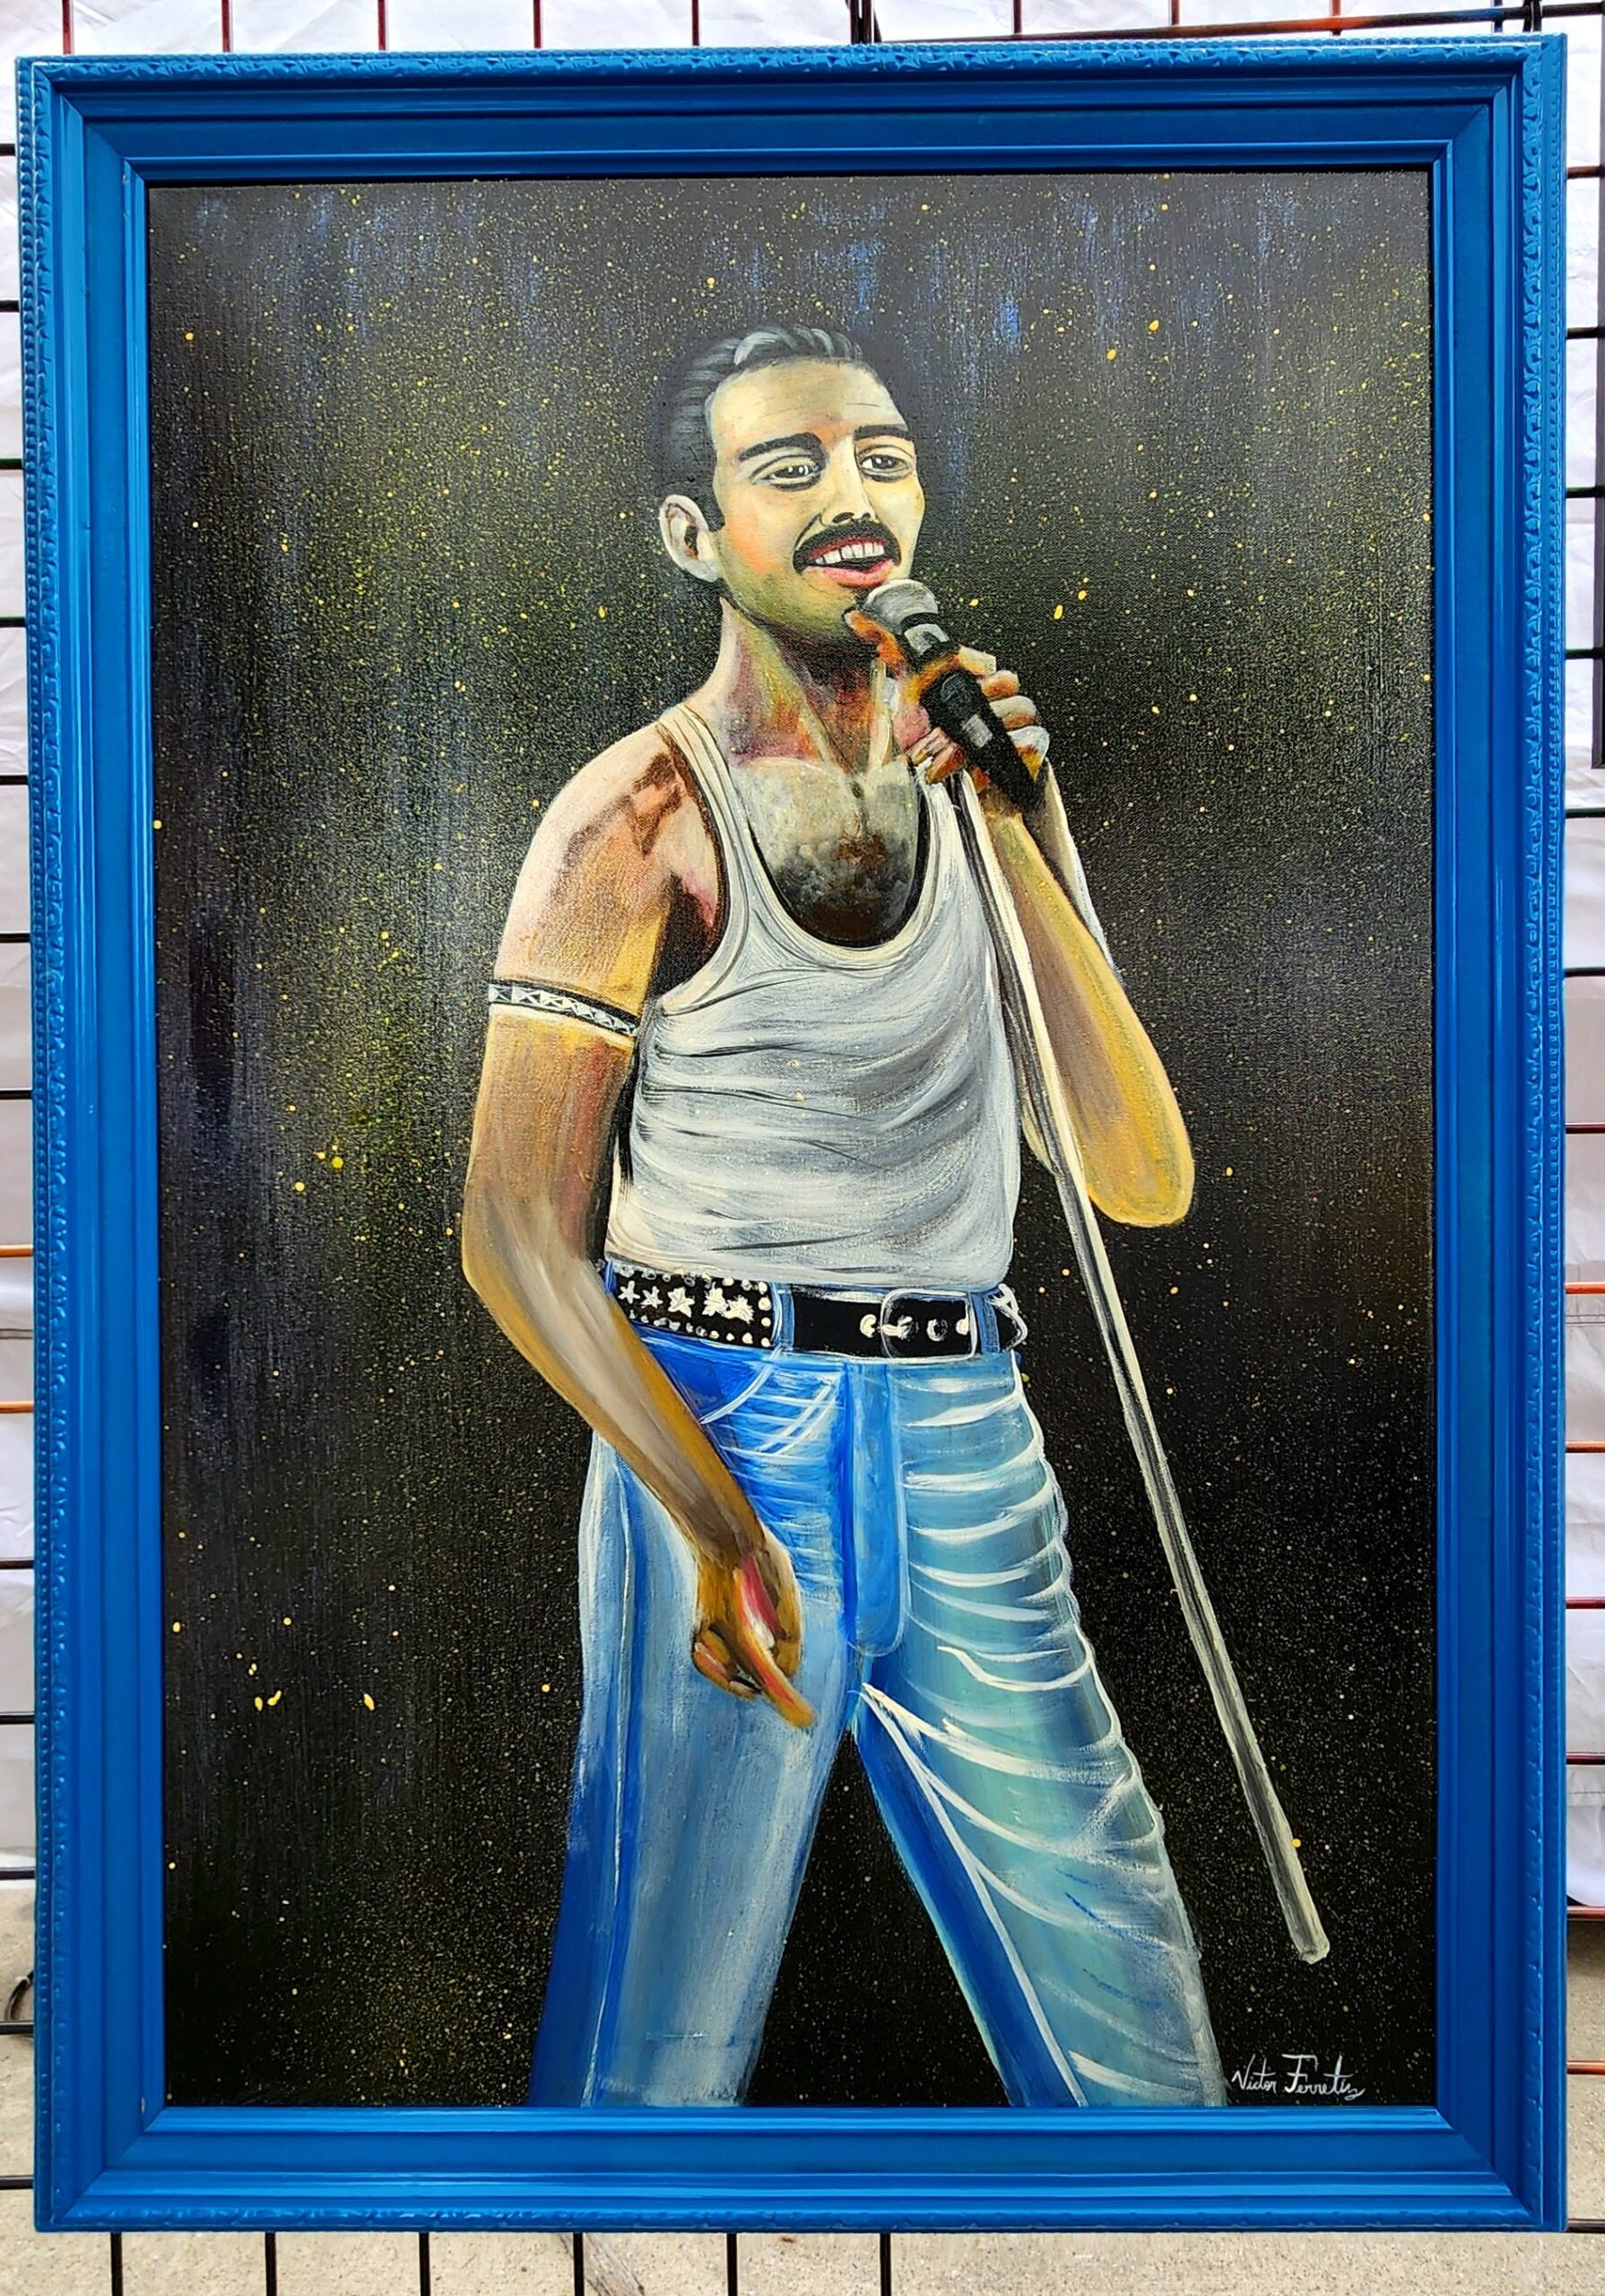 Surrealistic portrait of Freddie Mercury in acrylic paint on canvas. Painted wooden frame.
Painting size: 24"x36"